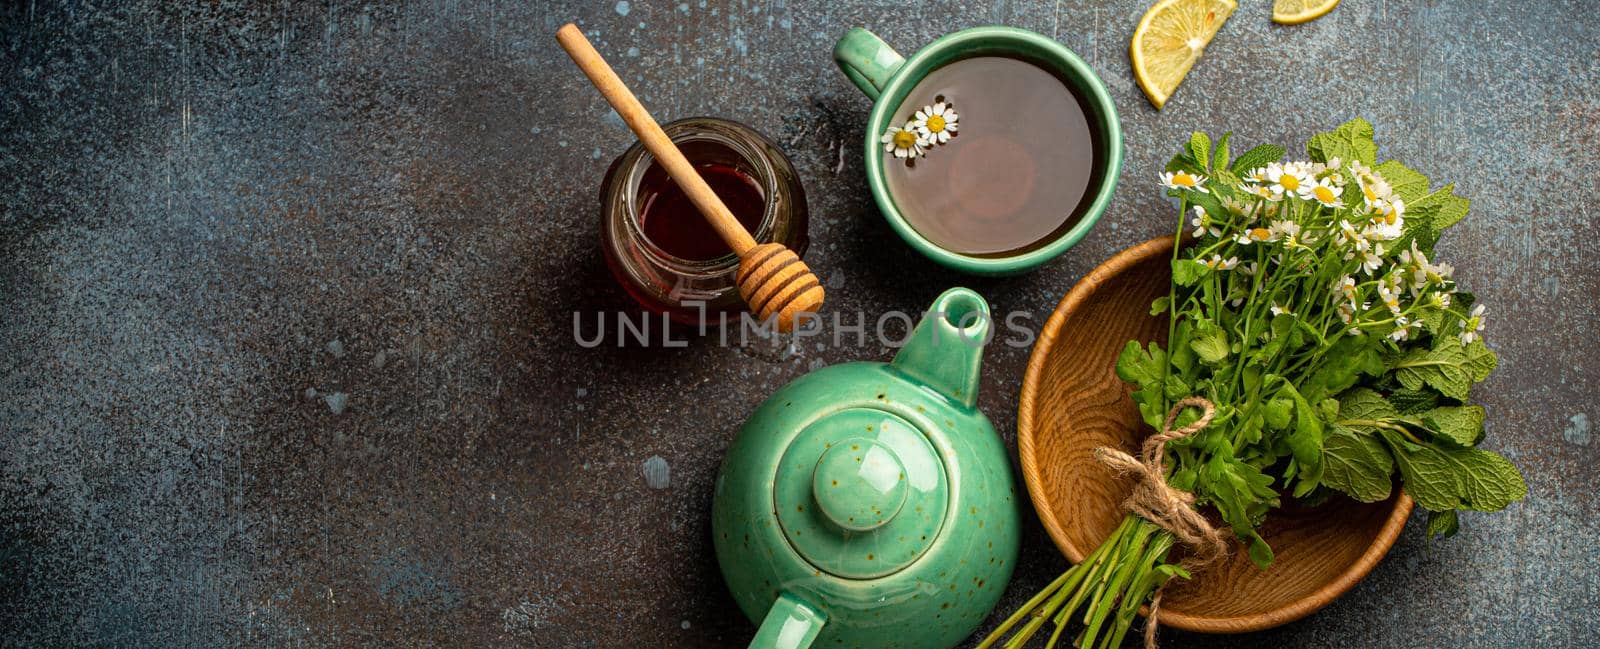 Herbal tea with camomile, fresh medical herbs and flowers, tea cup, tea pot, jar of honey, lemon top view on stone background, herbal alternative medicine and homeopathy remedy concept space for text